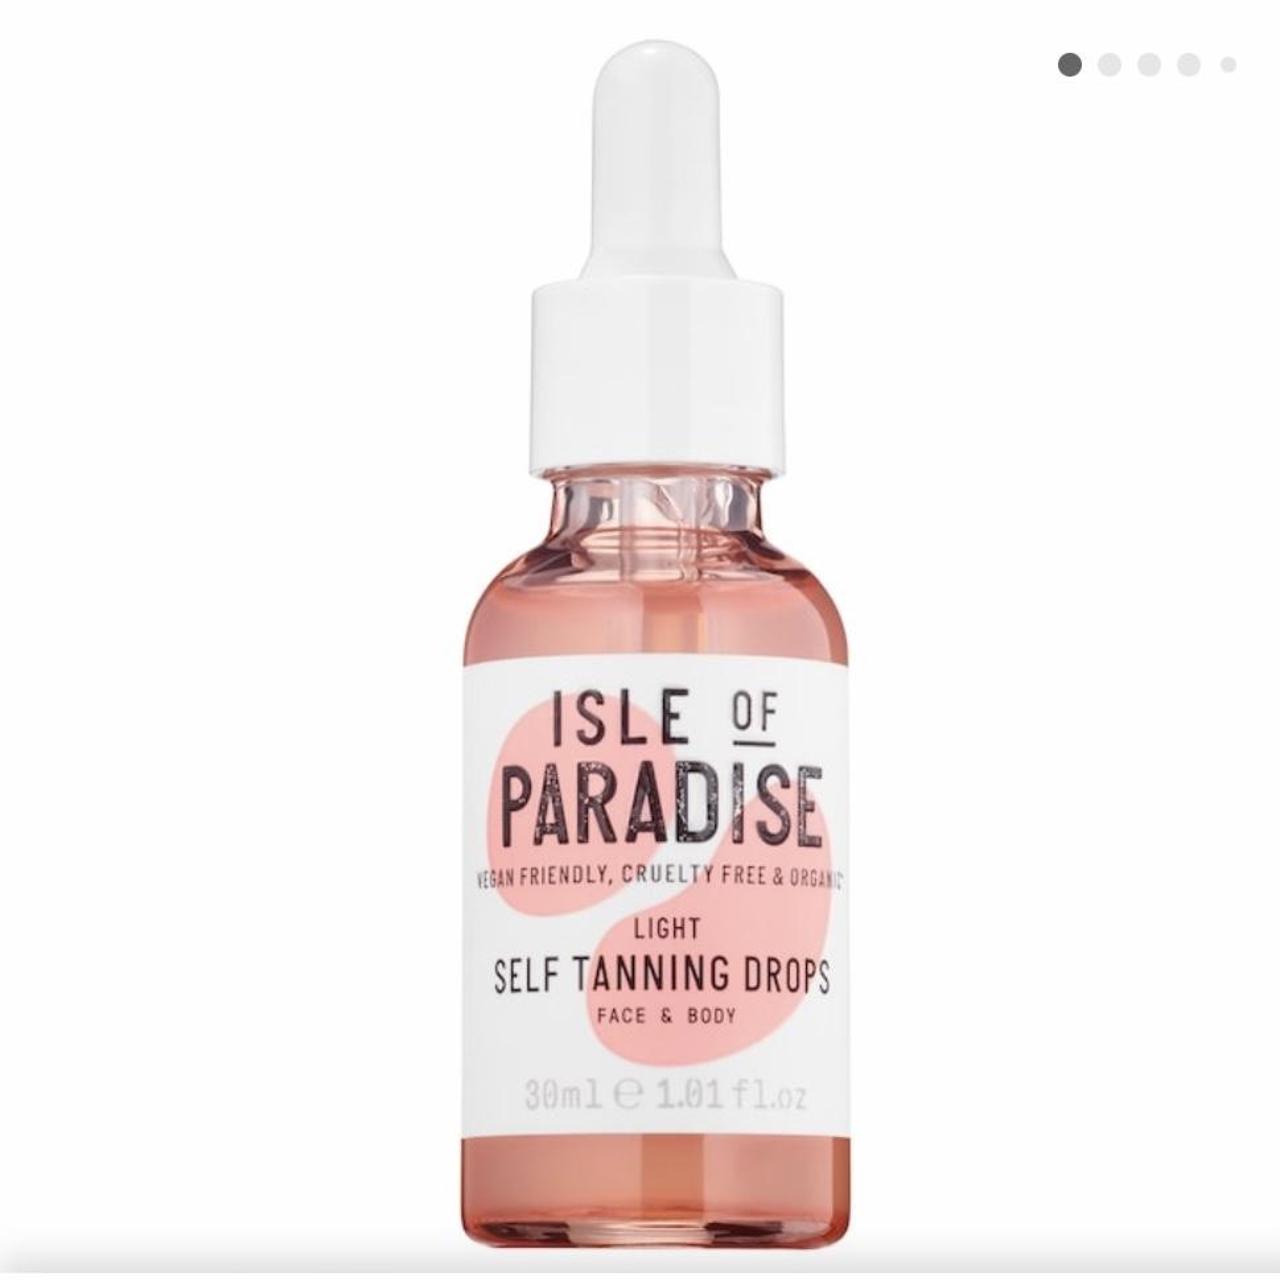 Product Image 1 - ISLE OF PARADISE
SELF TANNING DROPS